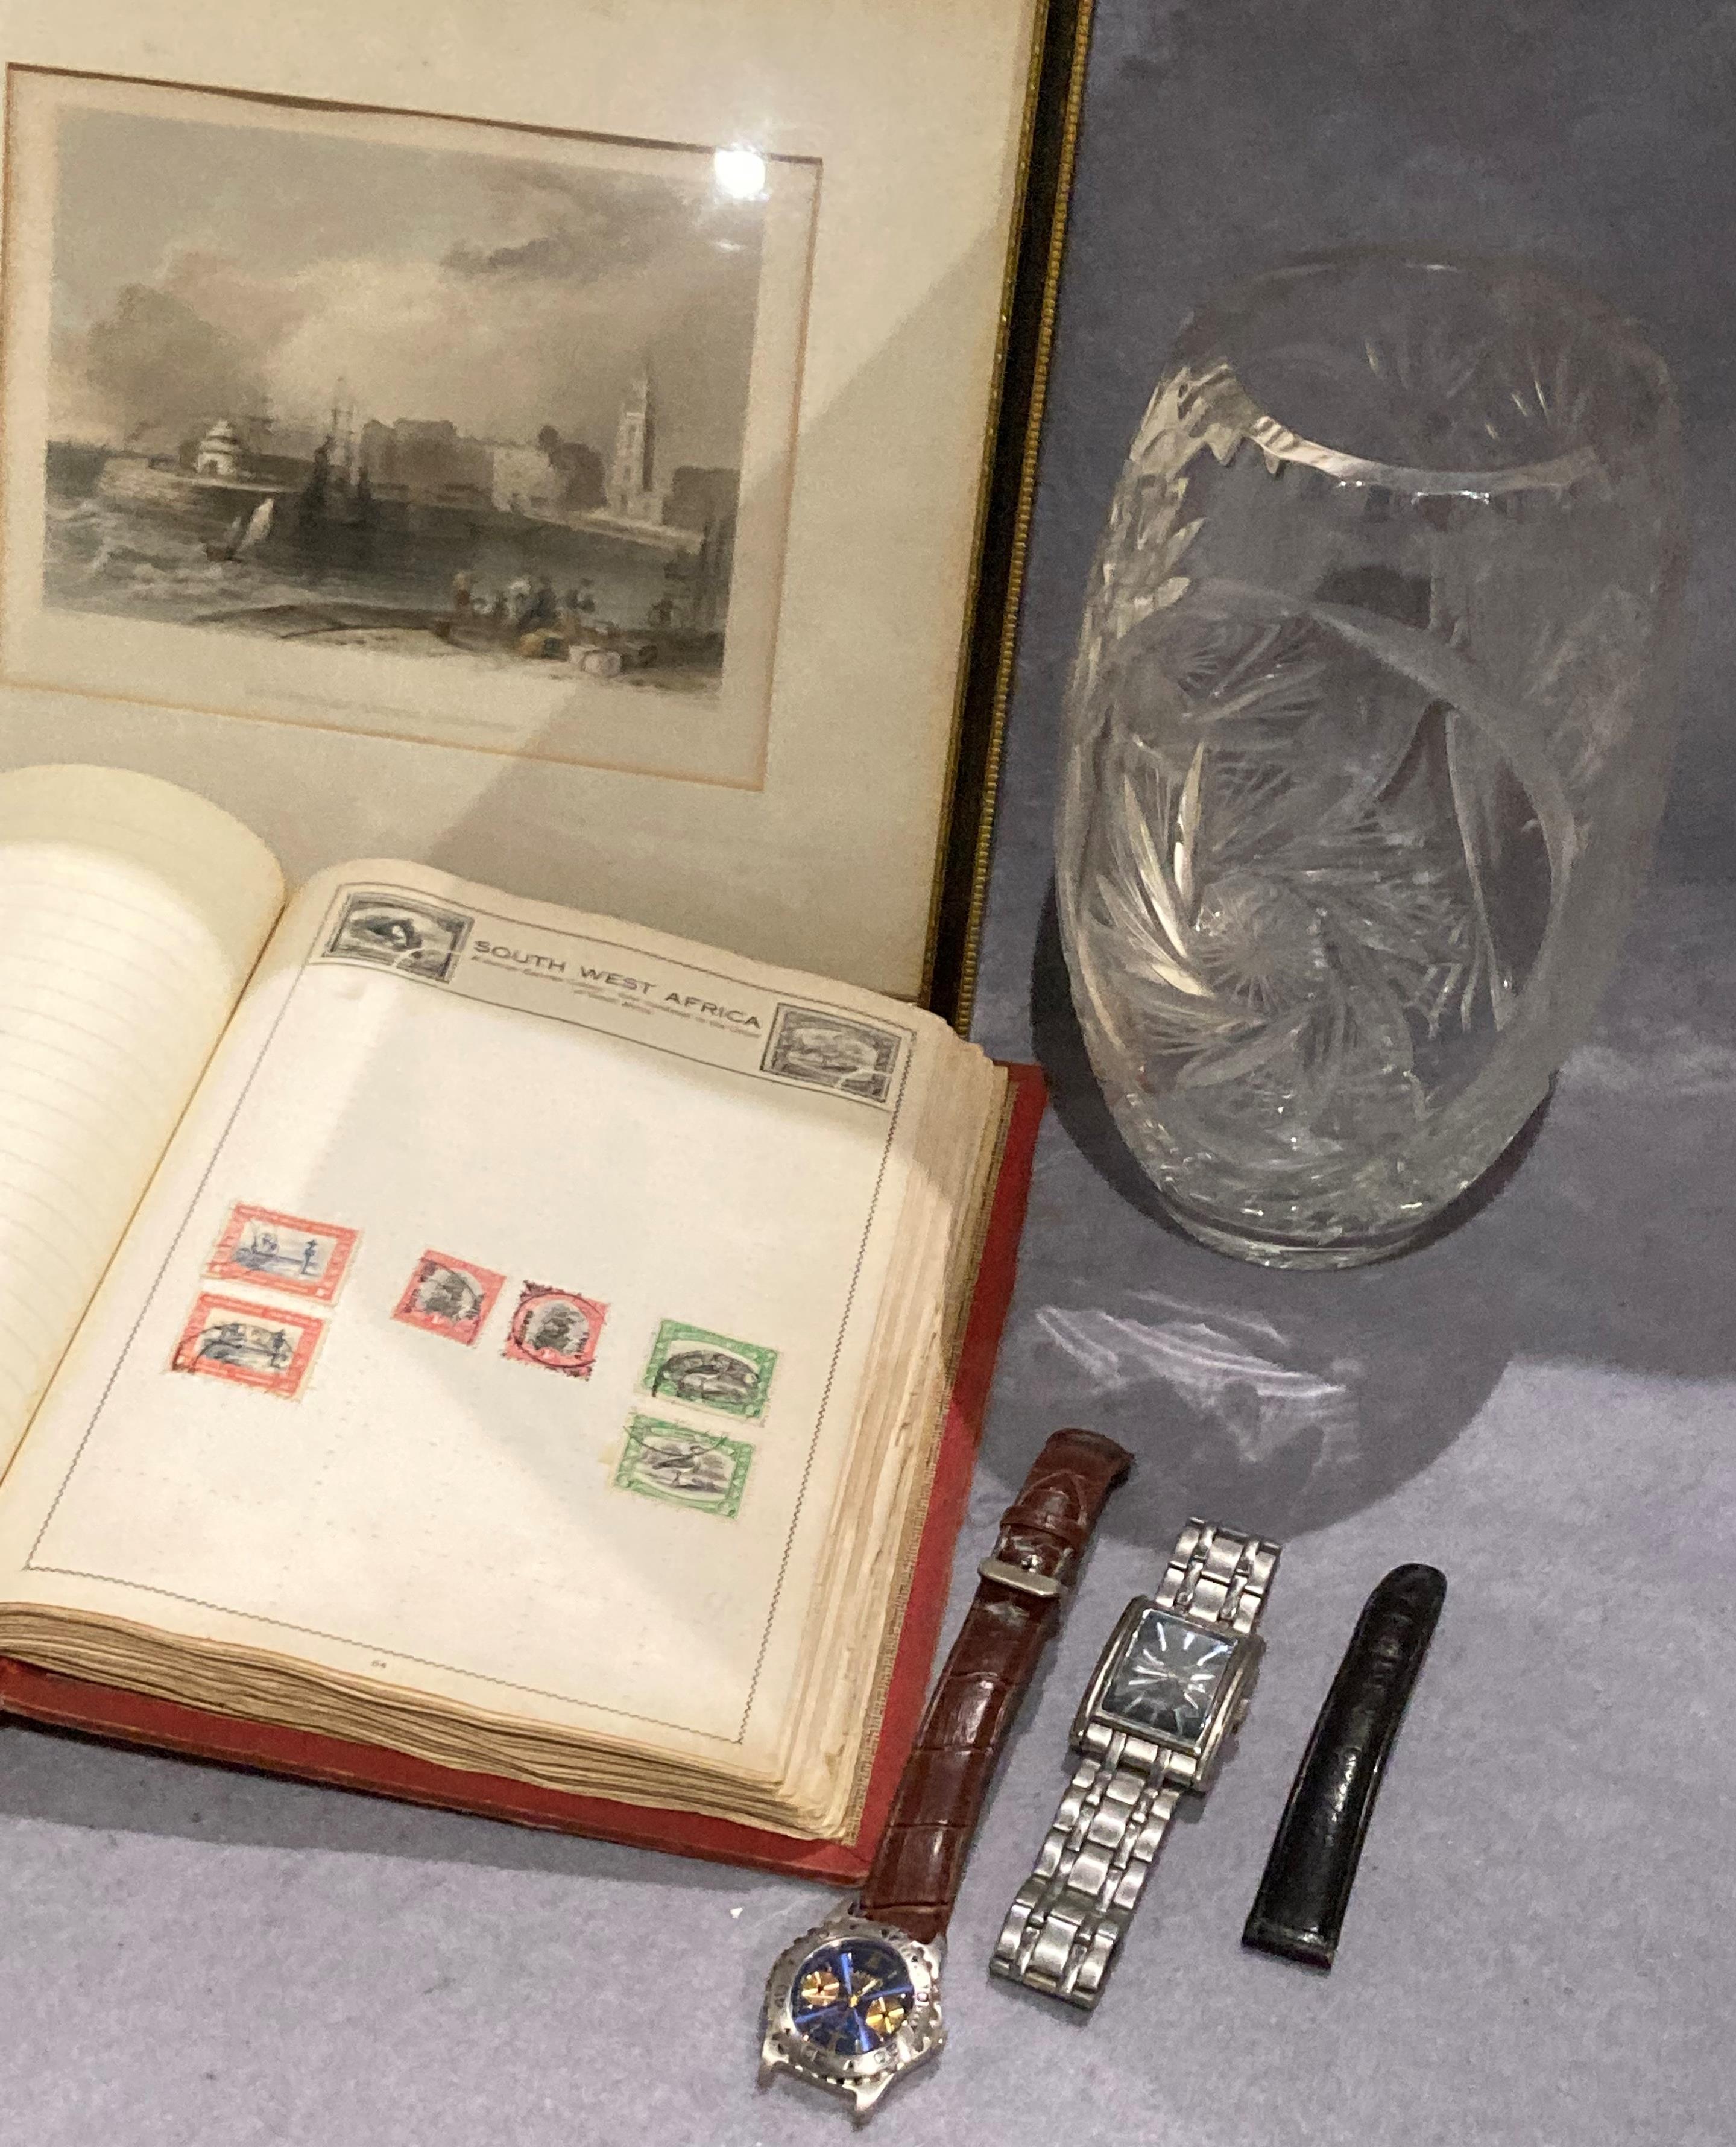 The Movaleaf illustrated stamp album and contents - assorted world stamps and contents to tray - - Image 4 of 7